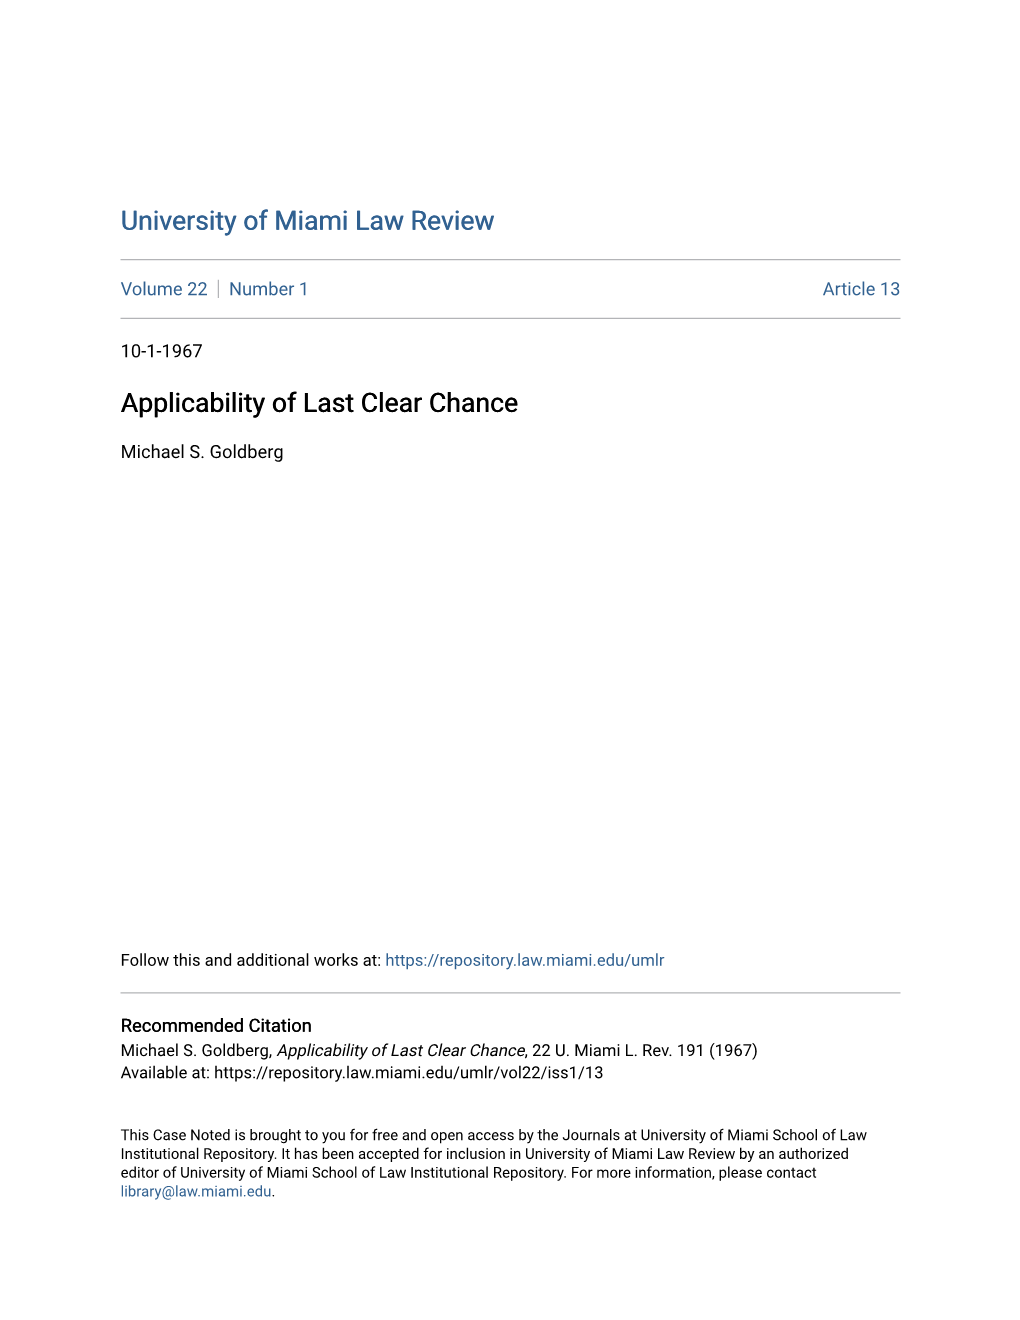 Applicability of Last Clear Chance